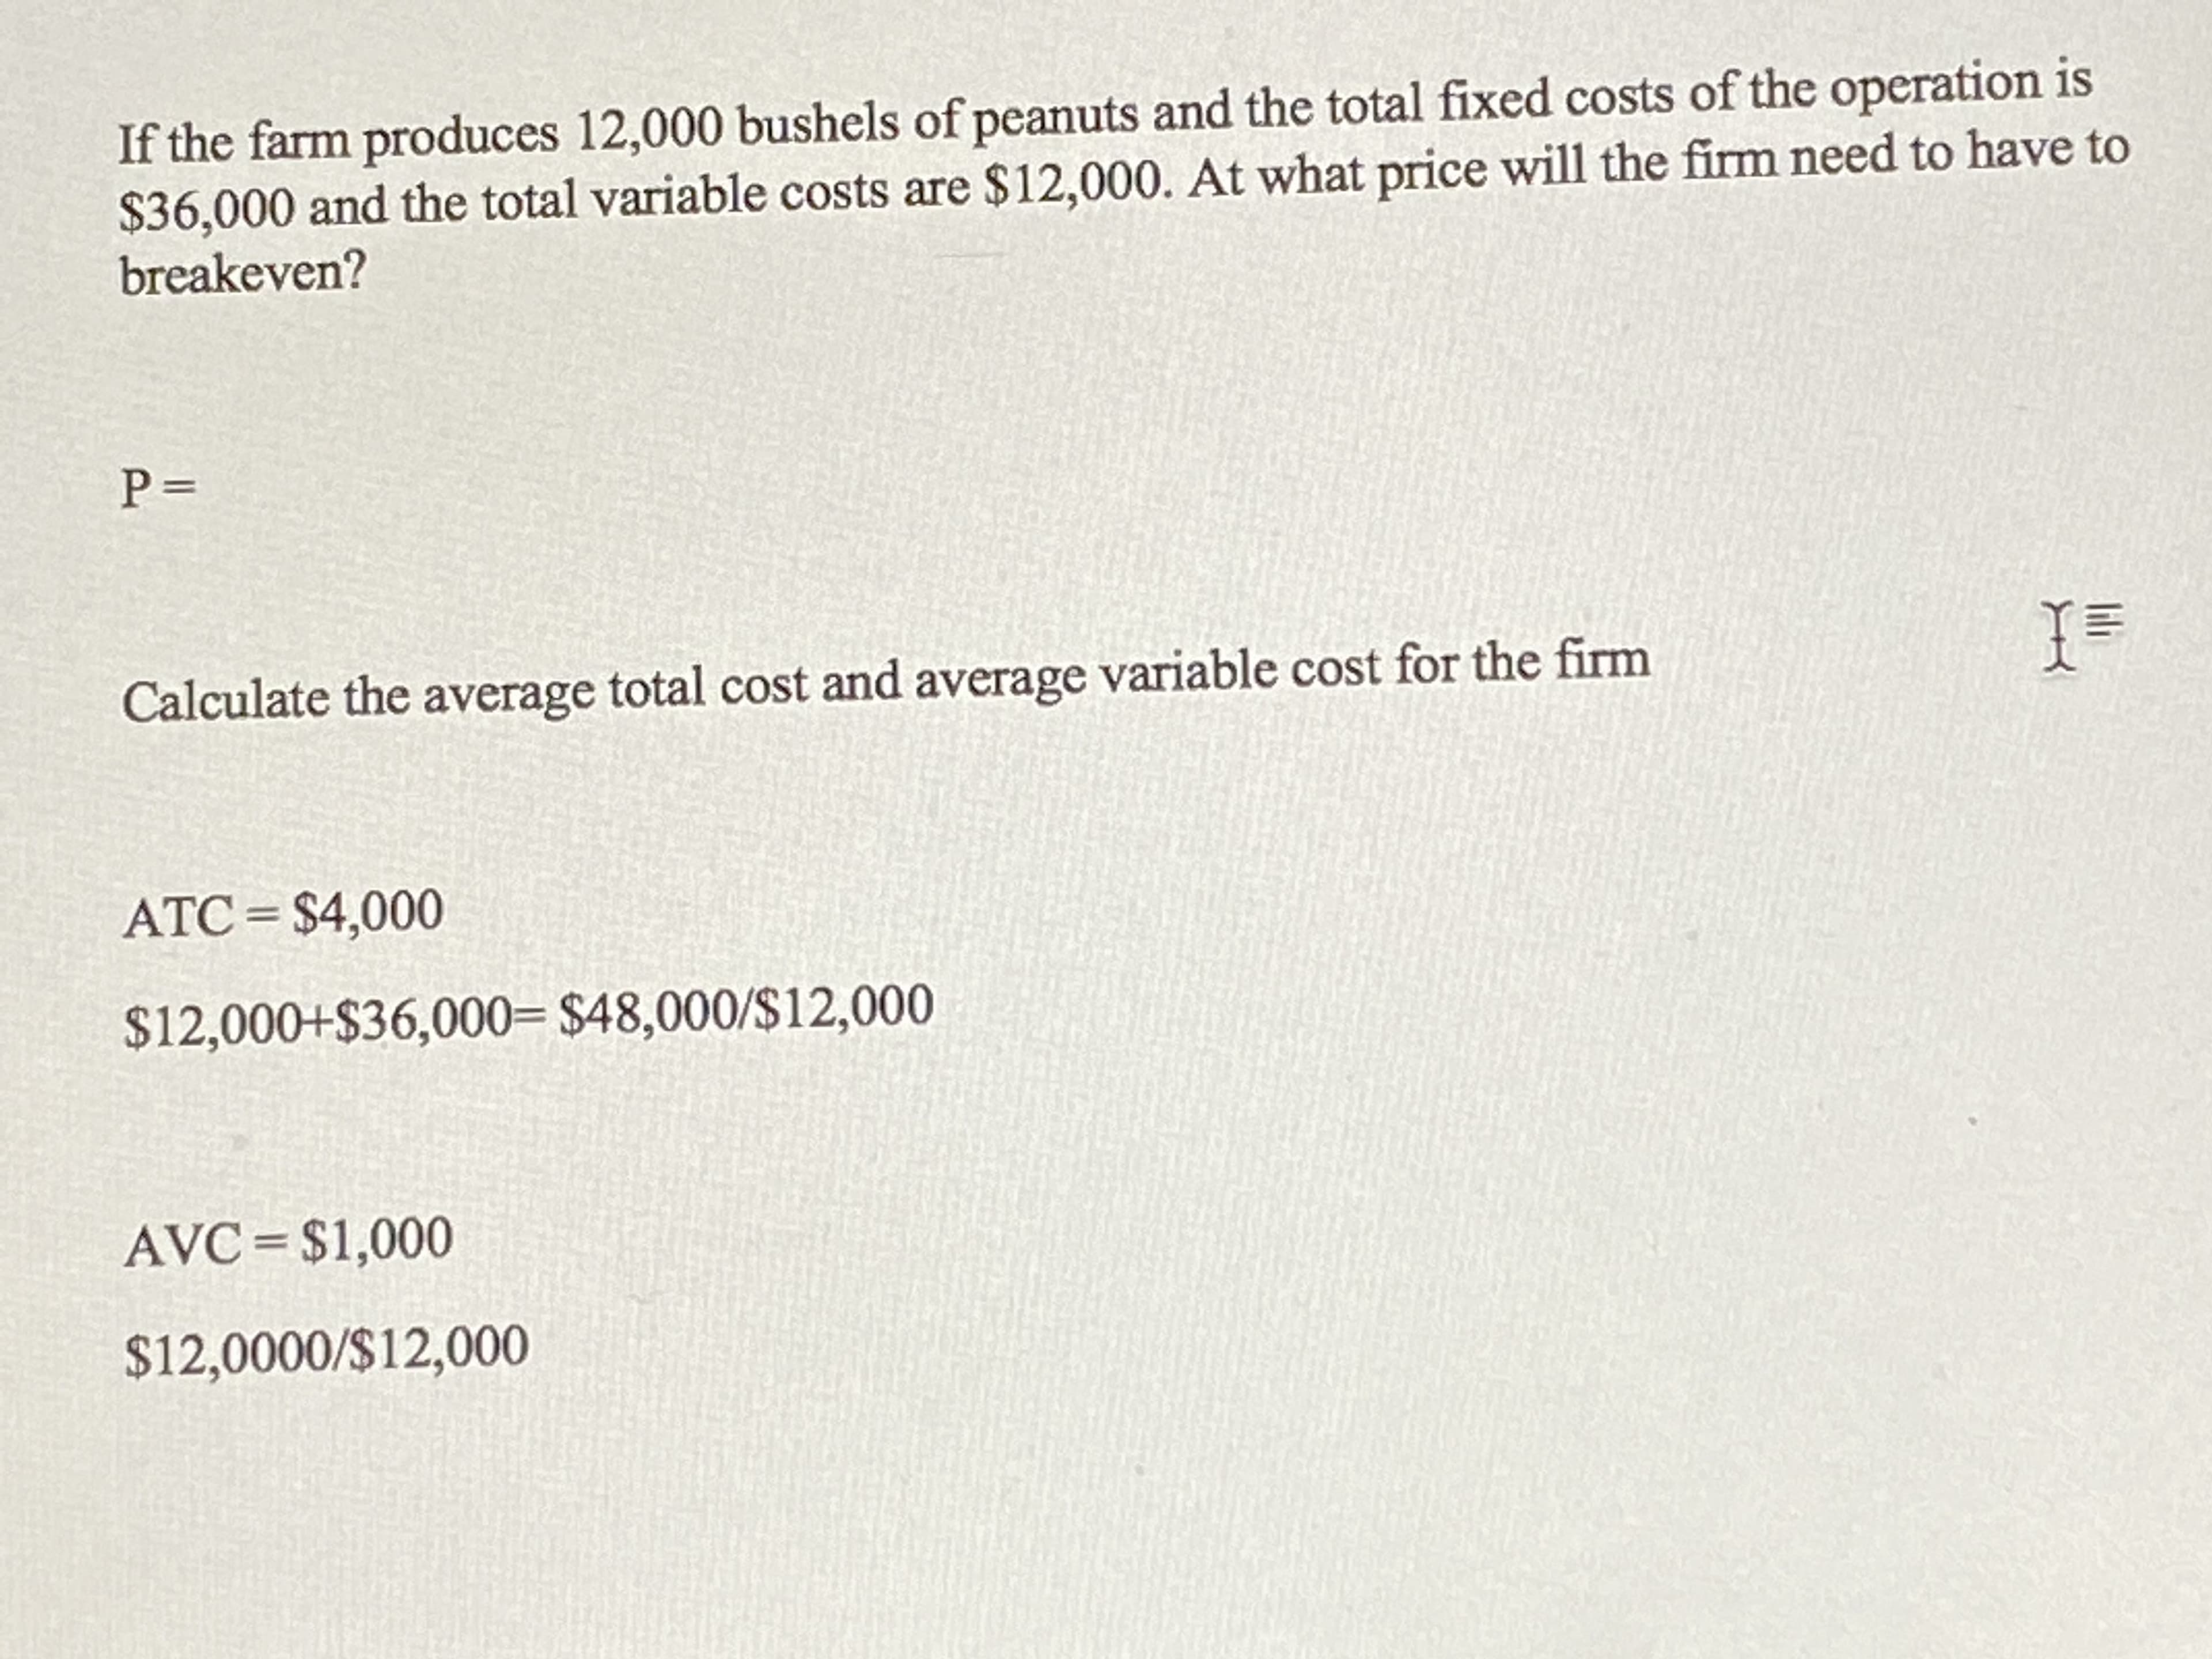 If the farm produces 12,000 bushels of peanuts and the total fixed costs of the operation is
$36,000 and the total variable costs are $12,000. At what price will the firm need to have to
breakeven?
Calculate the average total cost and average variable cost for the firm
ATC= $4,000
$12,000+$36,000= $48,000/S12,000
AVC= $1,000
$12,0000/$12,000
lili
||
P.
